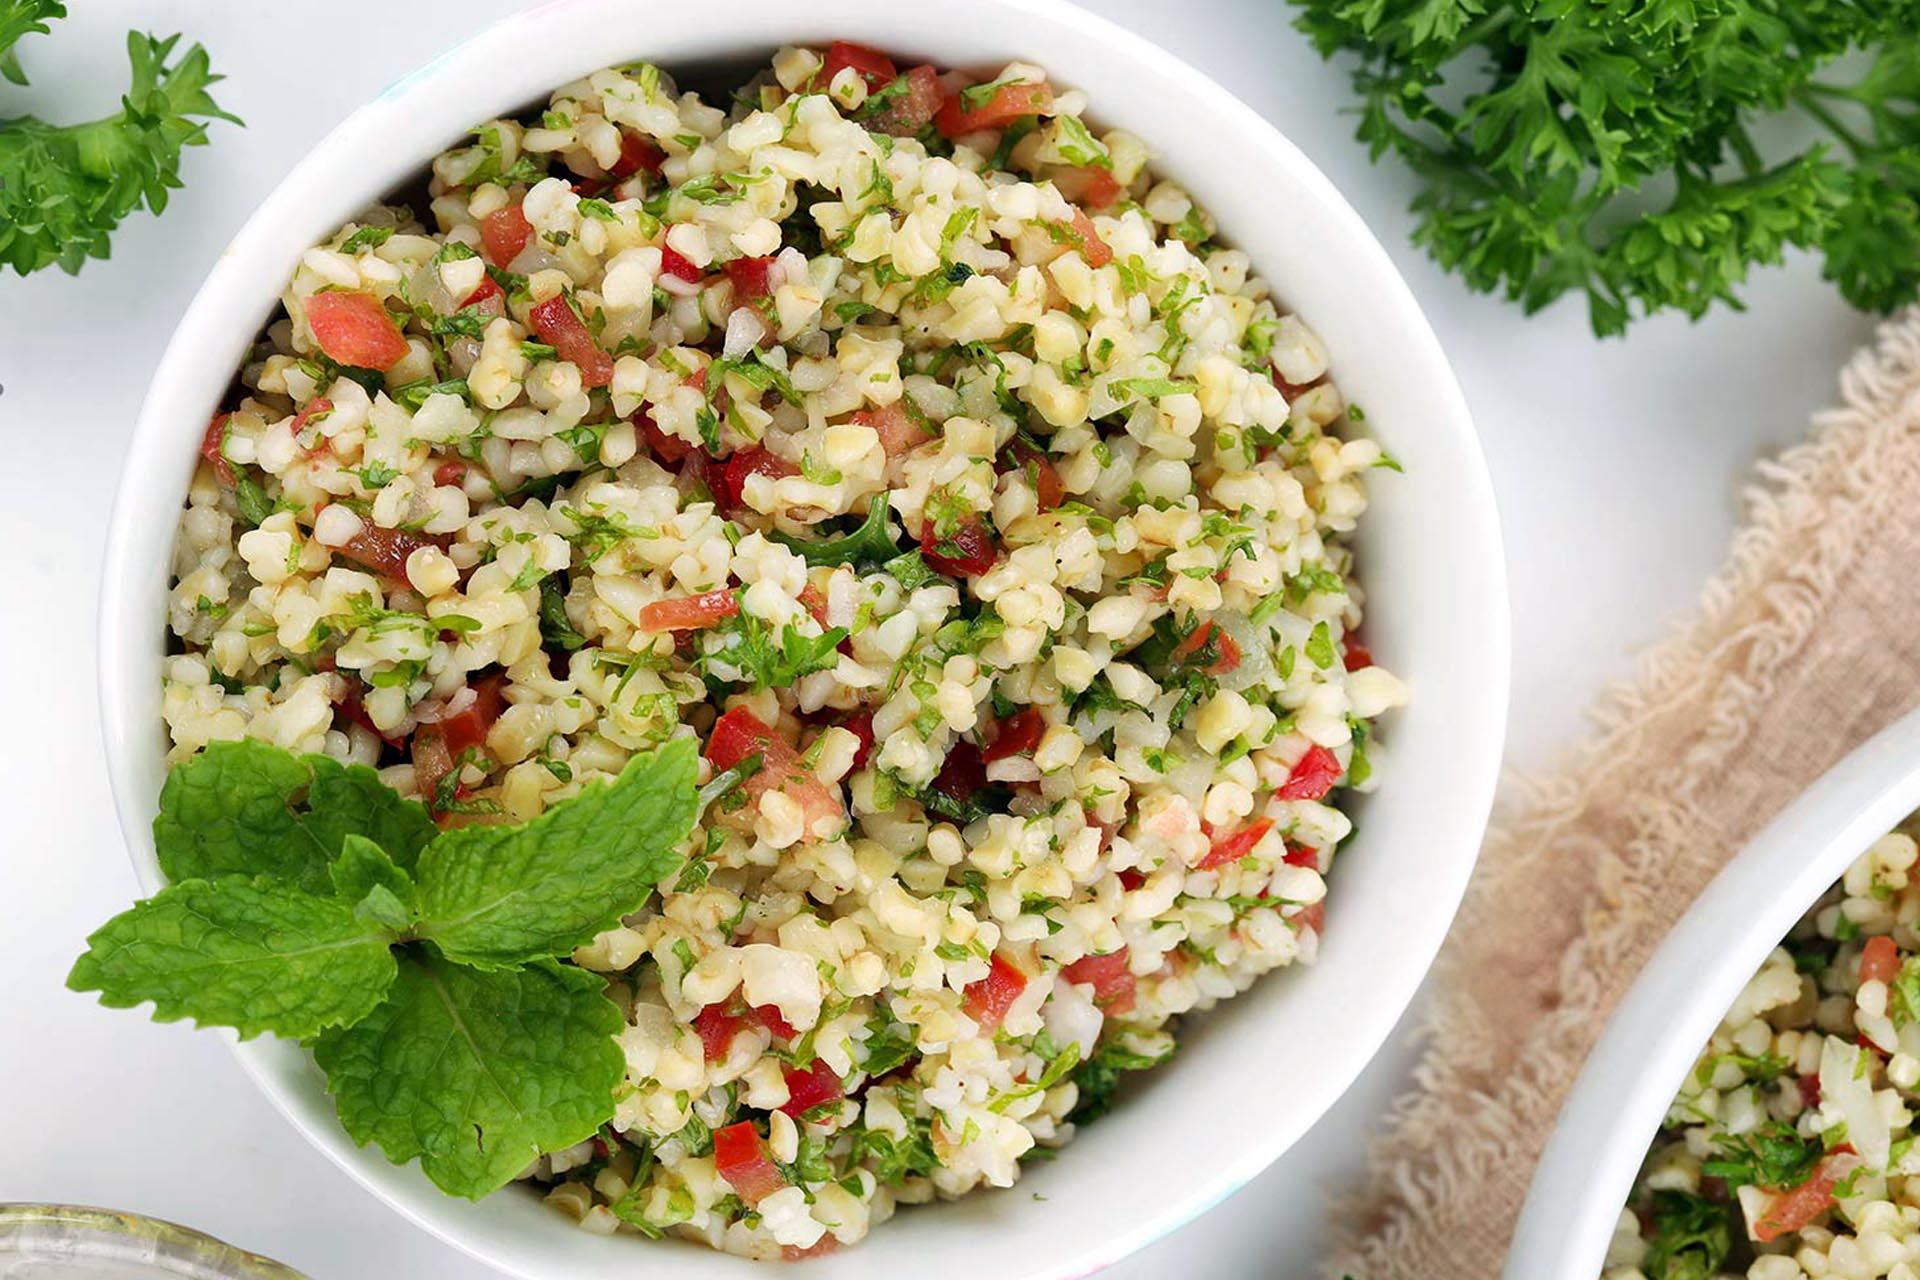 Step 5: Portion out tabbouleh onto serving bowls and enjoy.